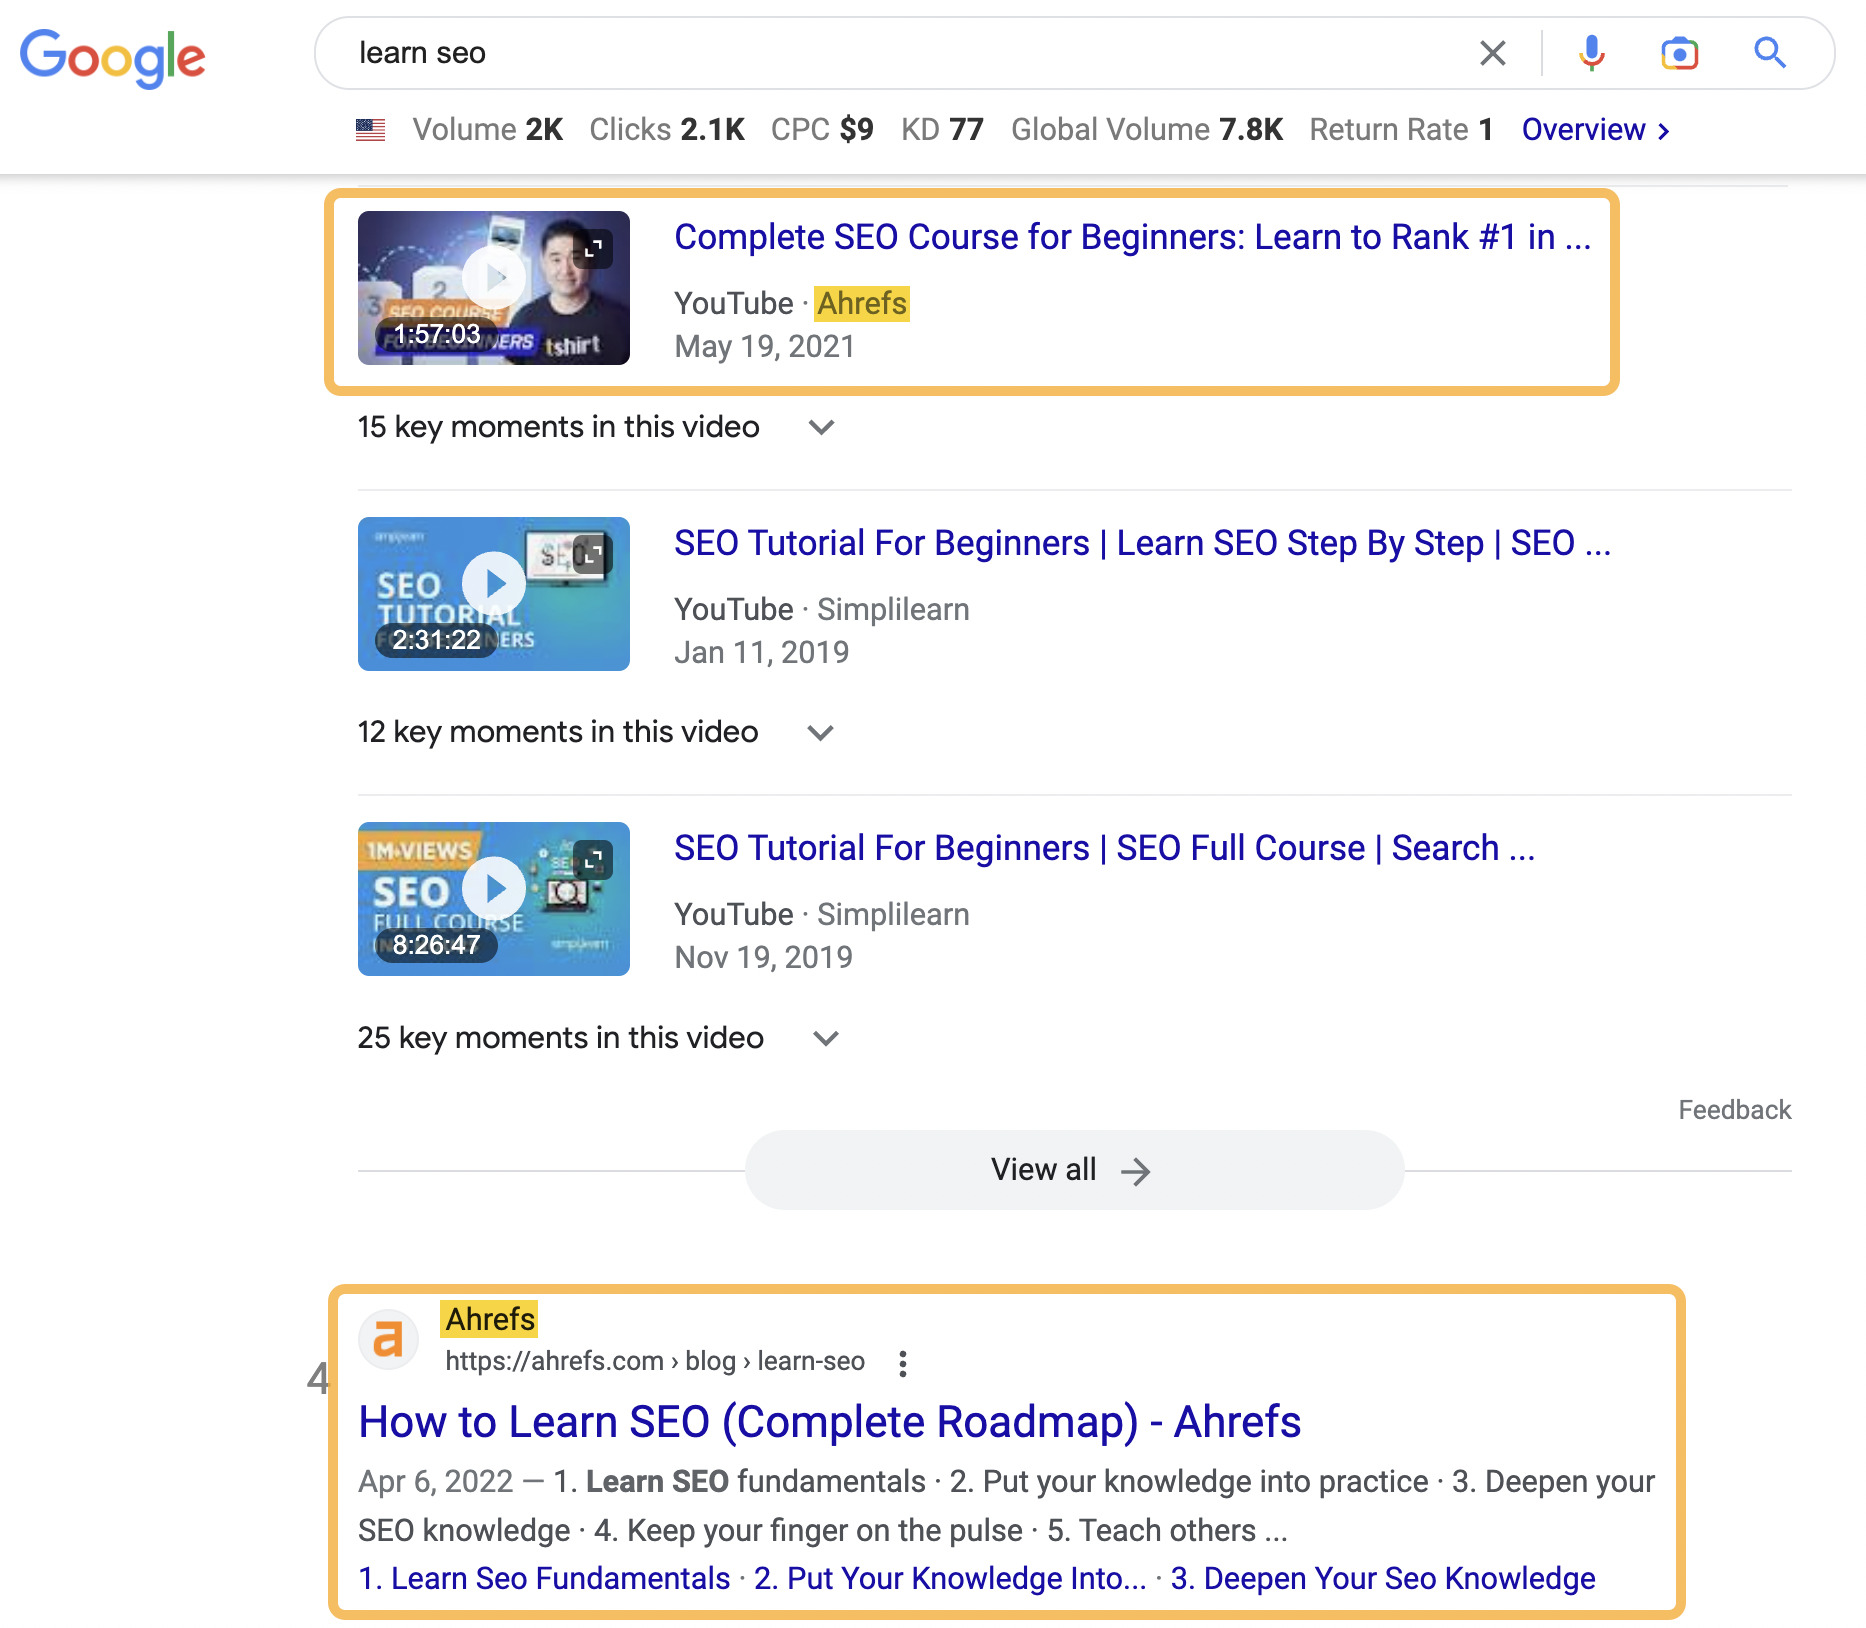 Google SERP showing Ahrefs displaying twice for "learn seo"